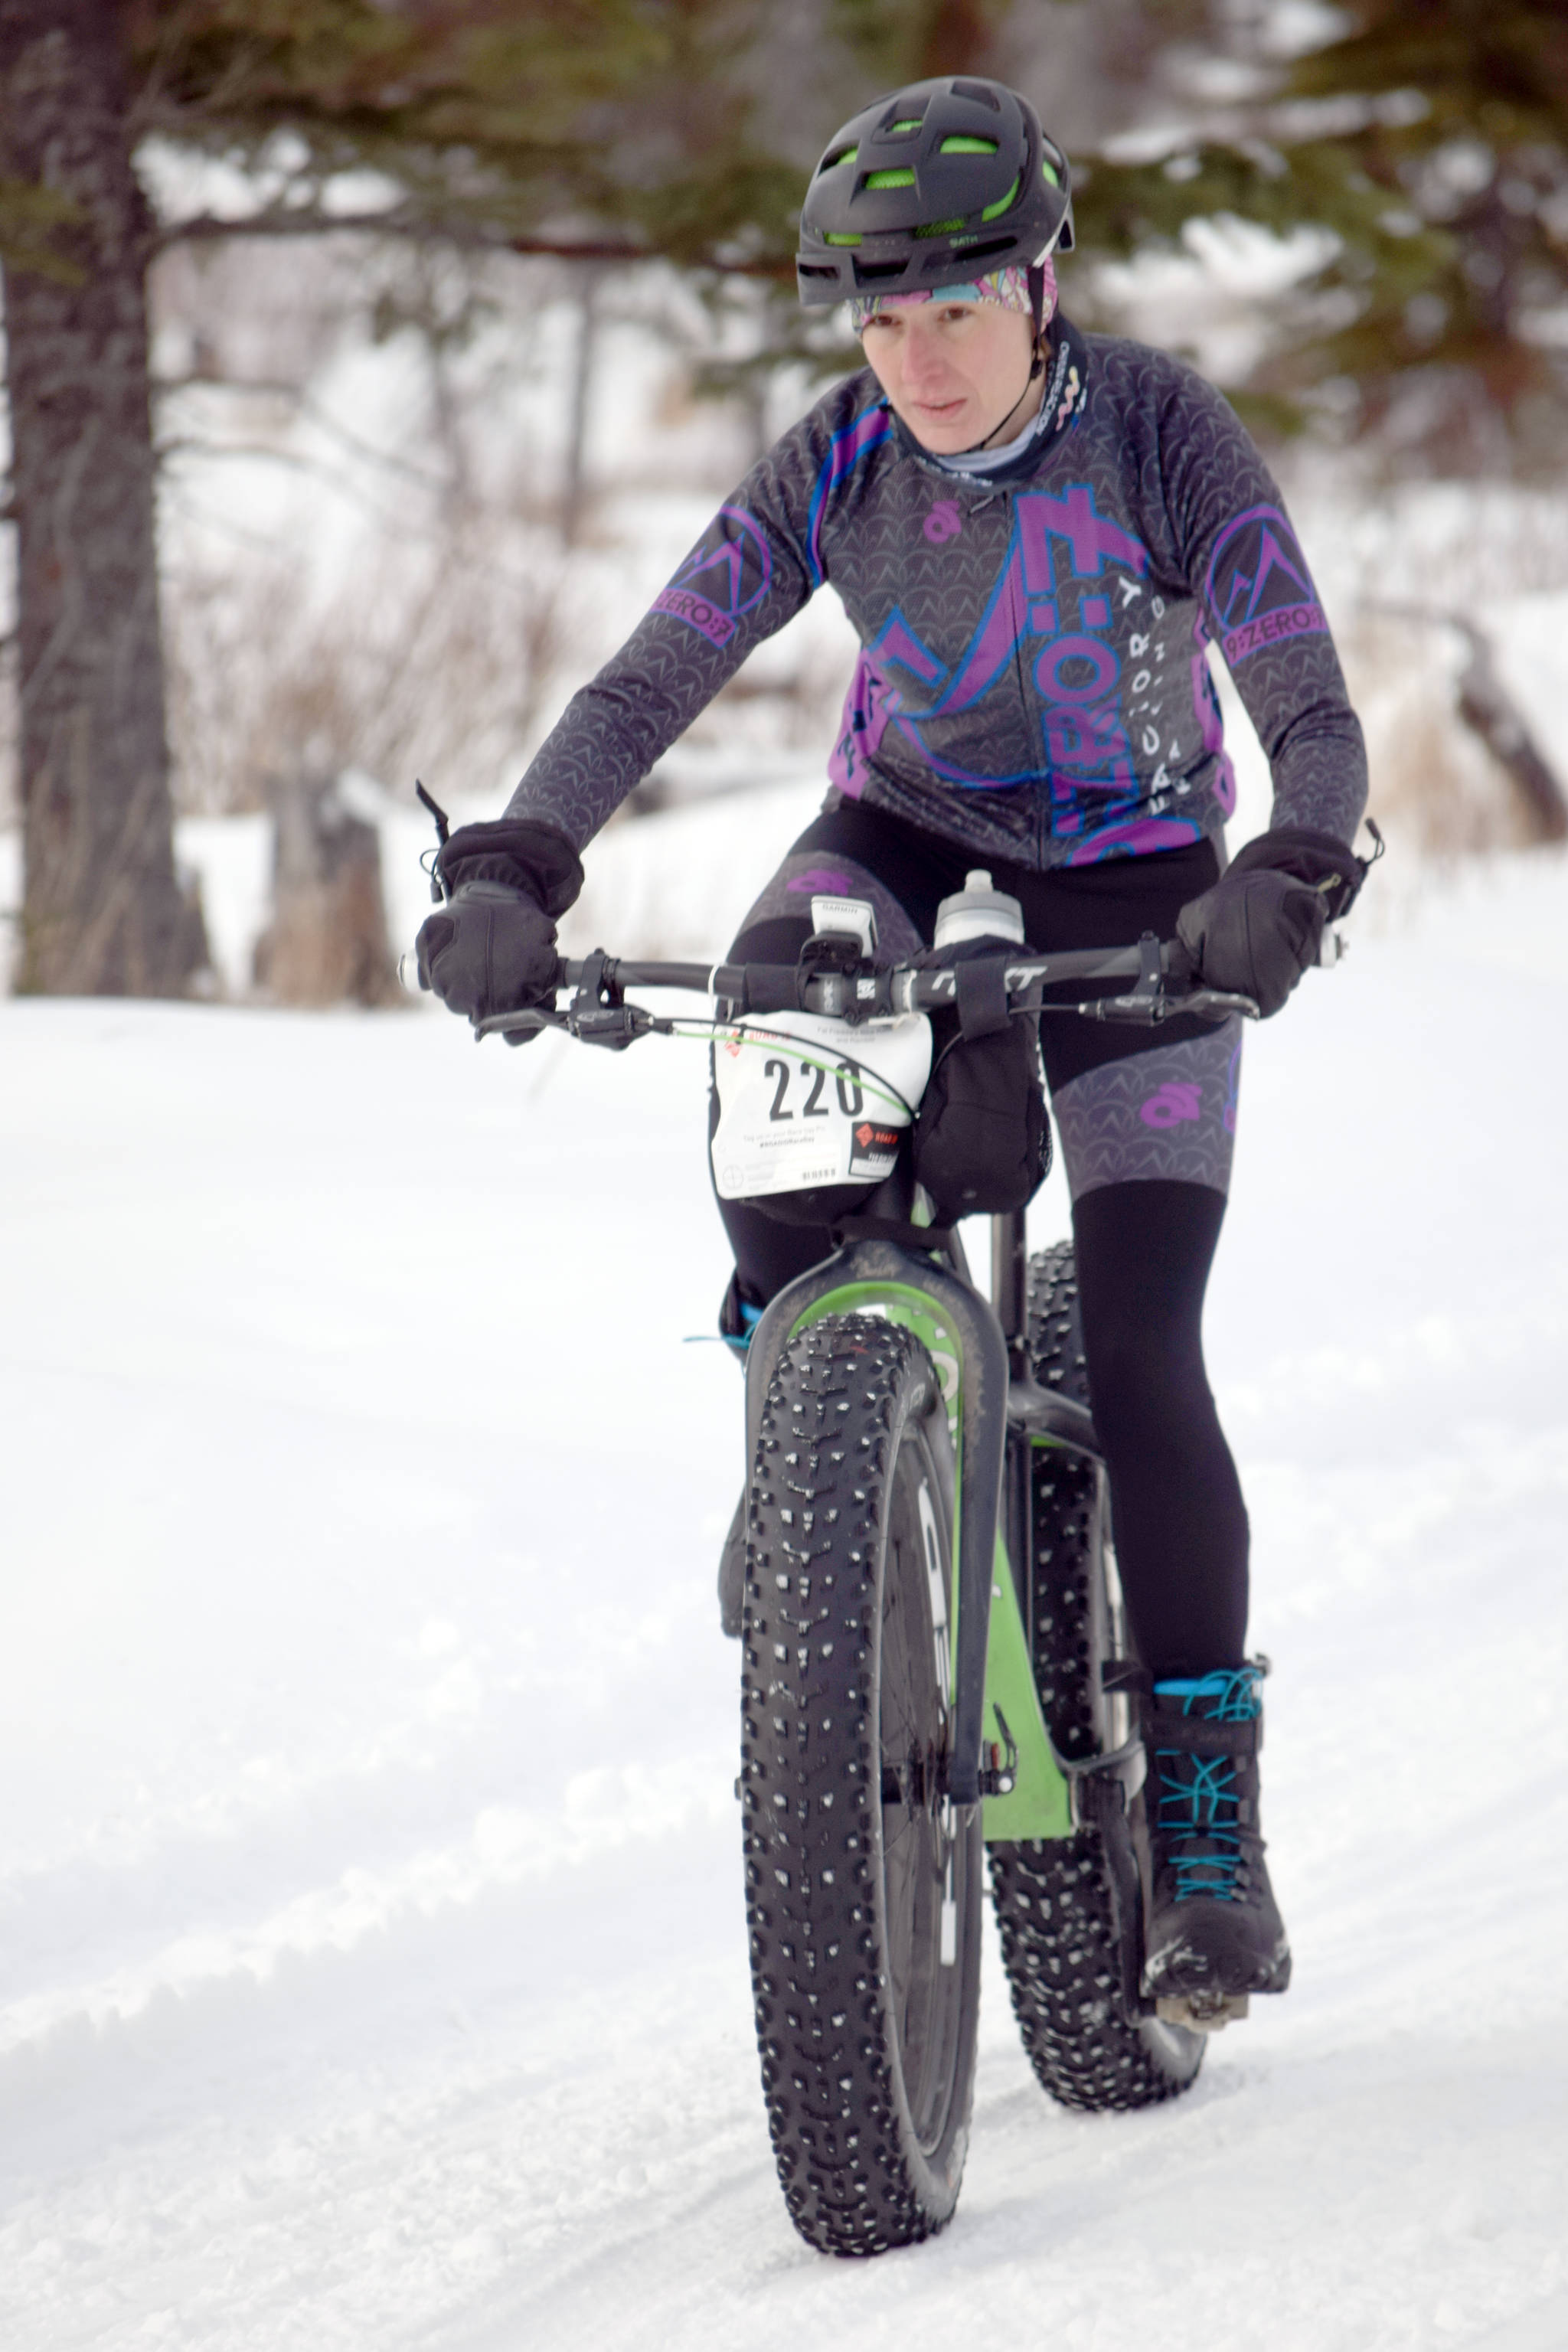 Women’s winner Amber Bethe glides down the bottom of a hill during the second half of Fat Freddie’s Bike Race and Ramble on Saturday, Feb. 10, 2018, in the Caribou Hills. (Photo by Jeff Helminiak/Peninsula Clarion)